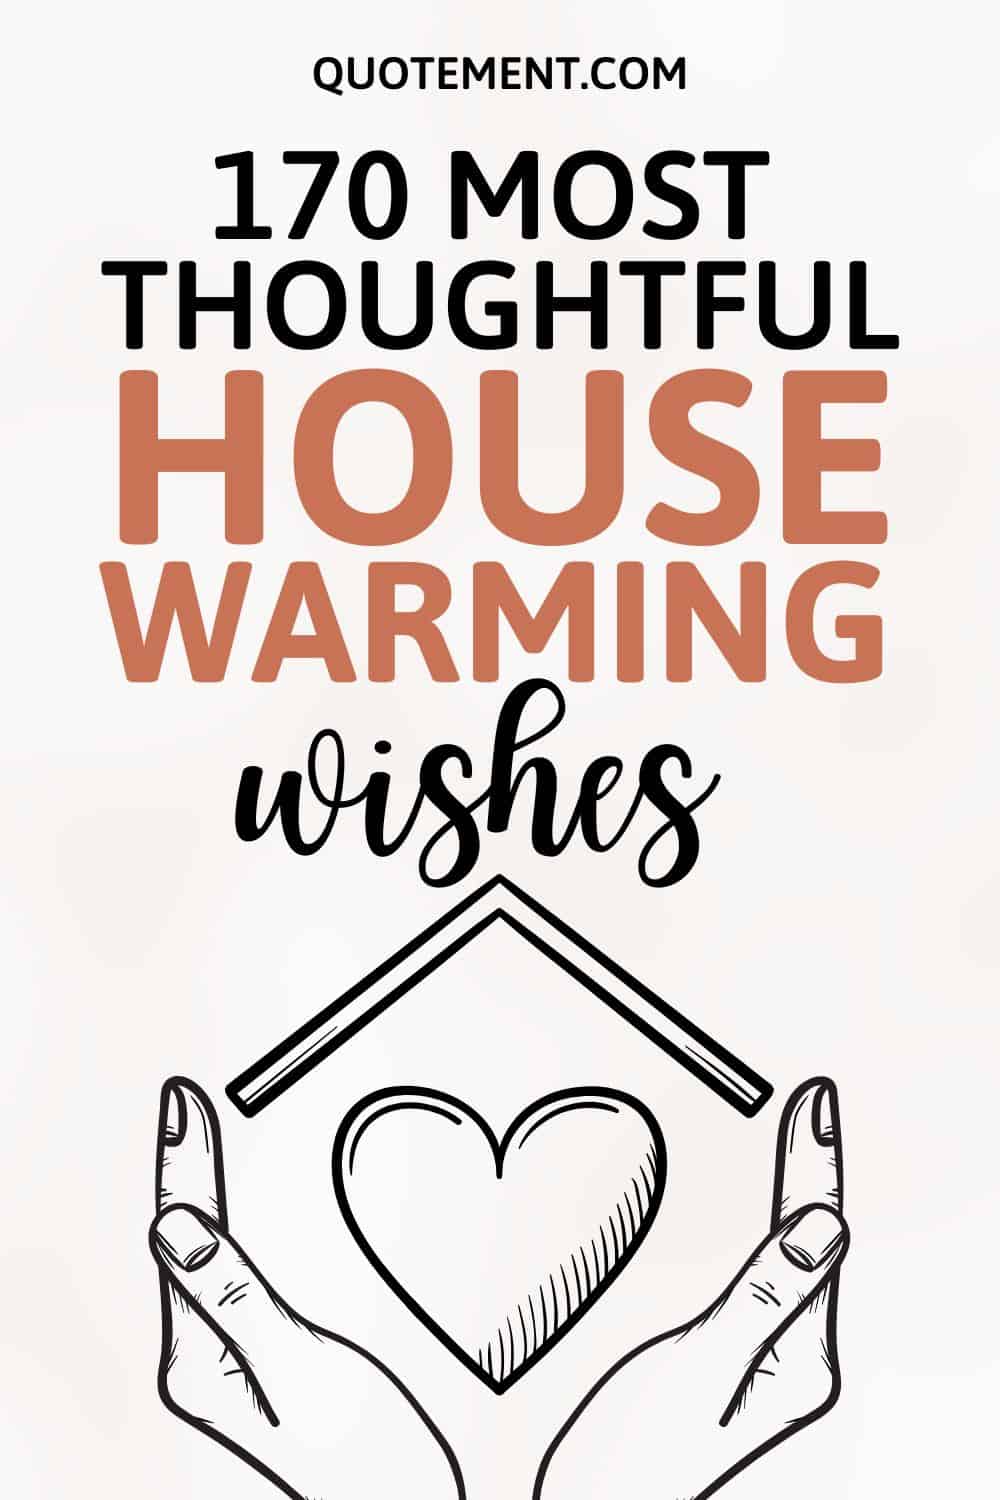 170 Heartfelt House Warming Wishes For New Homeowners
